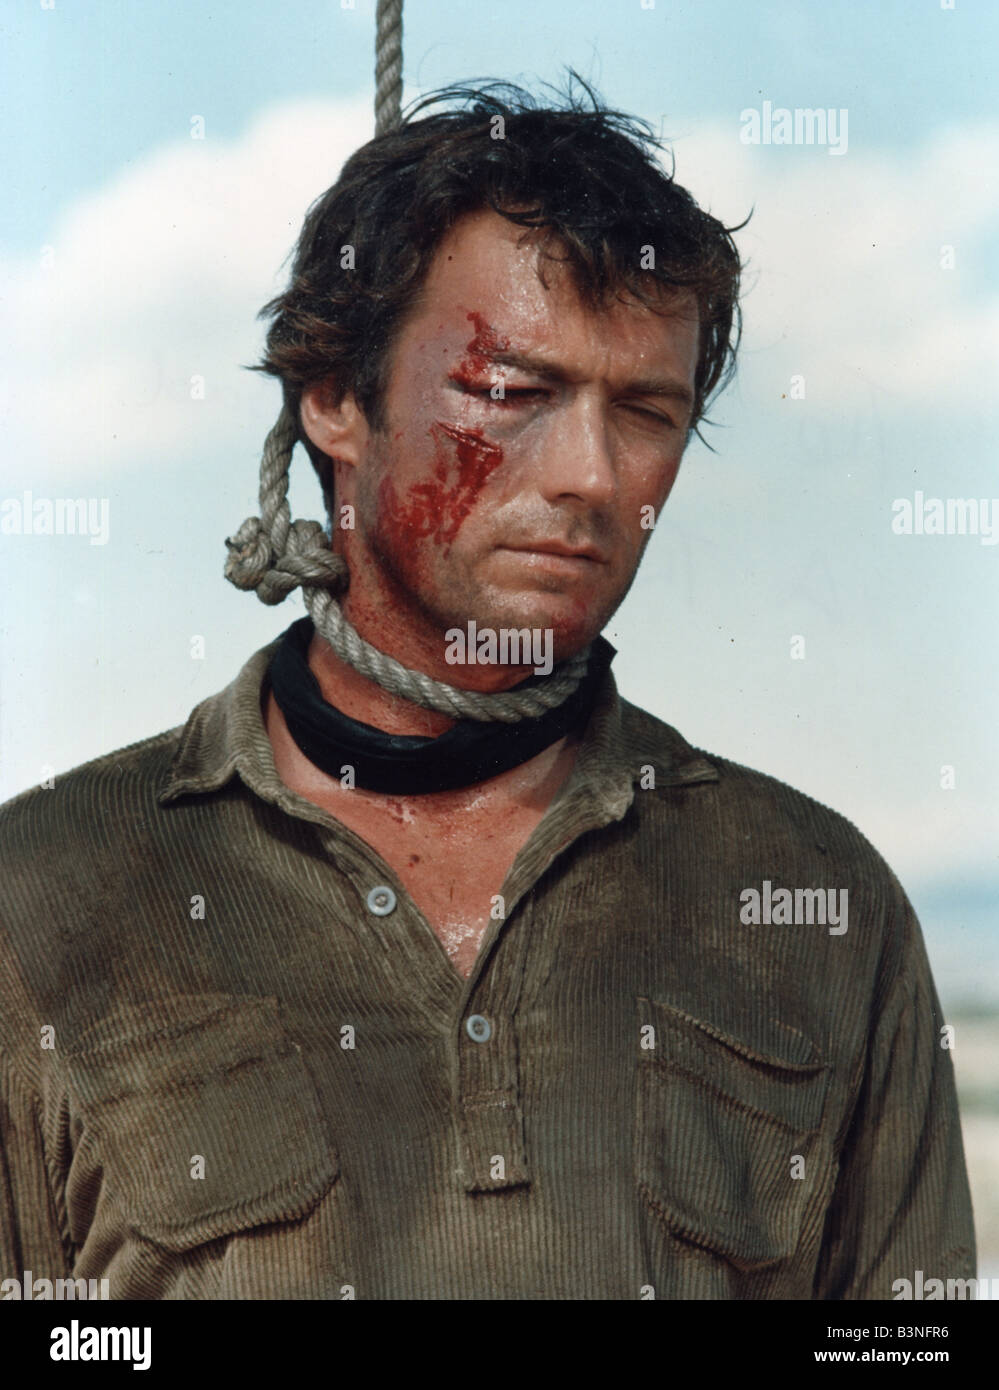 DER gute THE BAD und THE UGLY 1966 PEA-Film mit Clint Eastwood Stockfoto